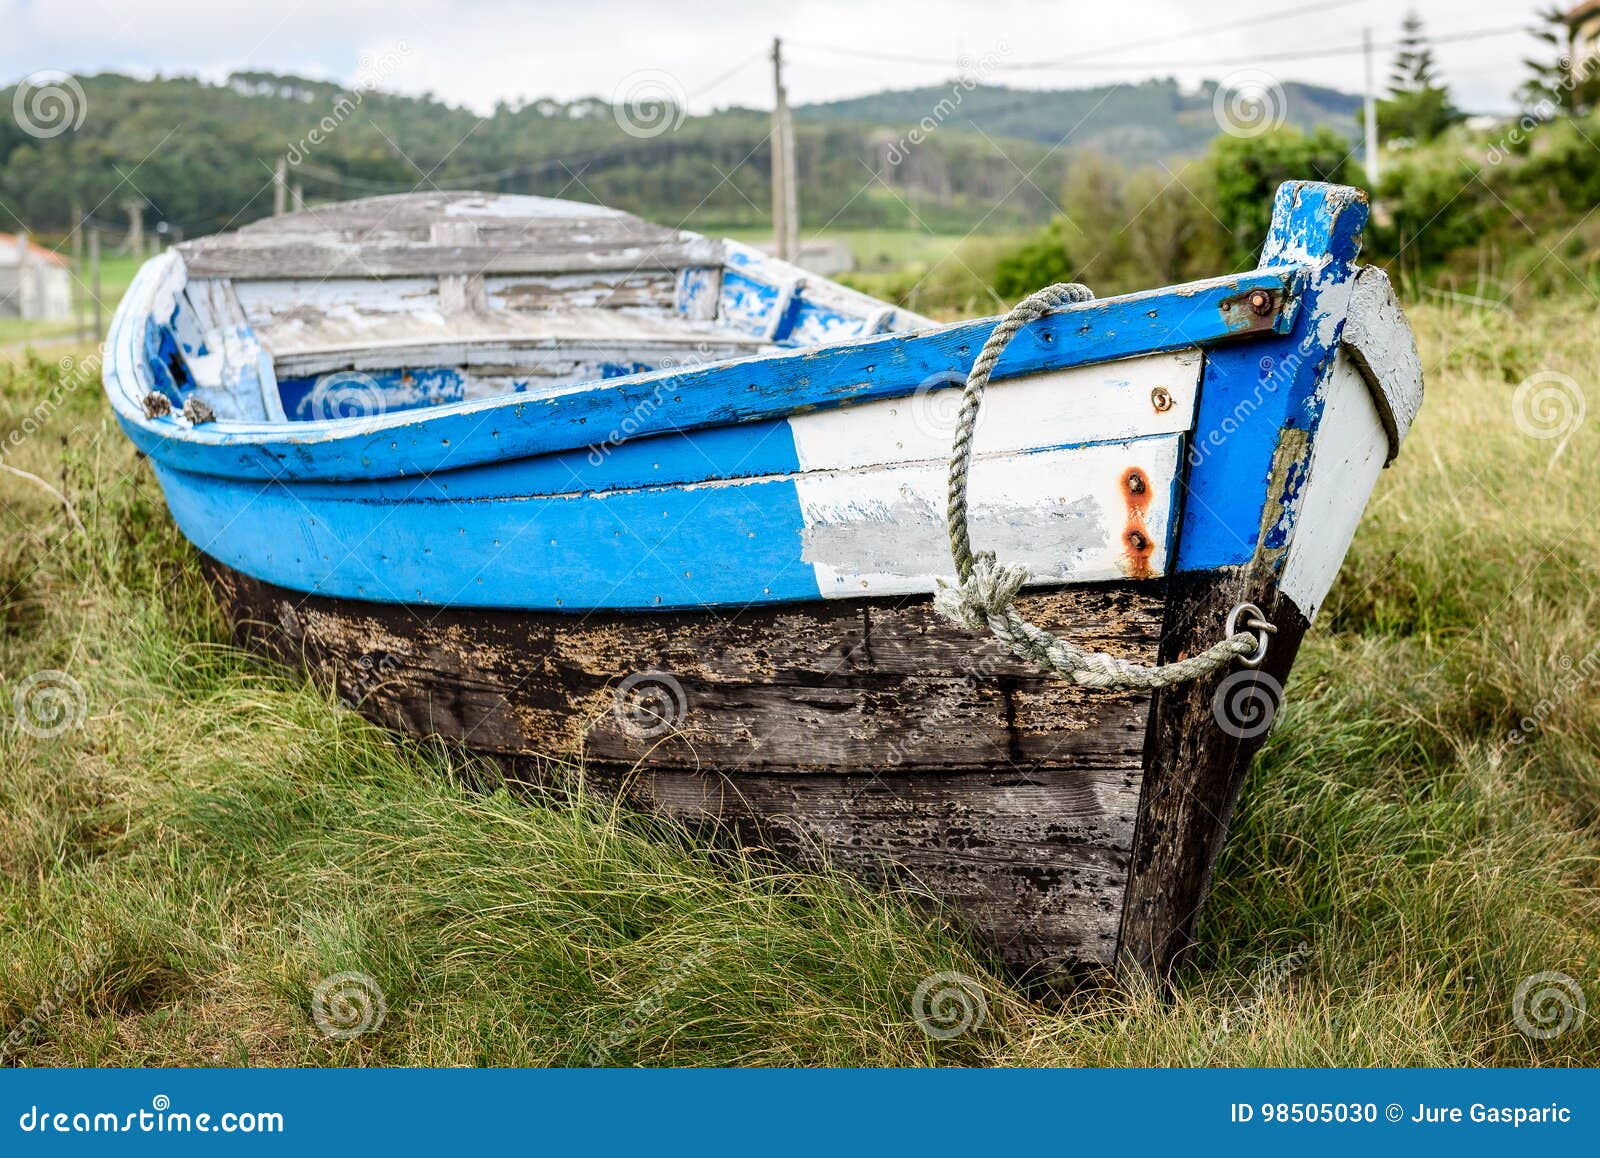 https://thumbs.dreamstime.com/z/old-abandoned-wooden-fishing-boat-stranded-land-grass-weathered-used-vintage-vessel-decaying-galicia-98505030.jpg